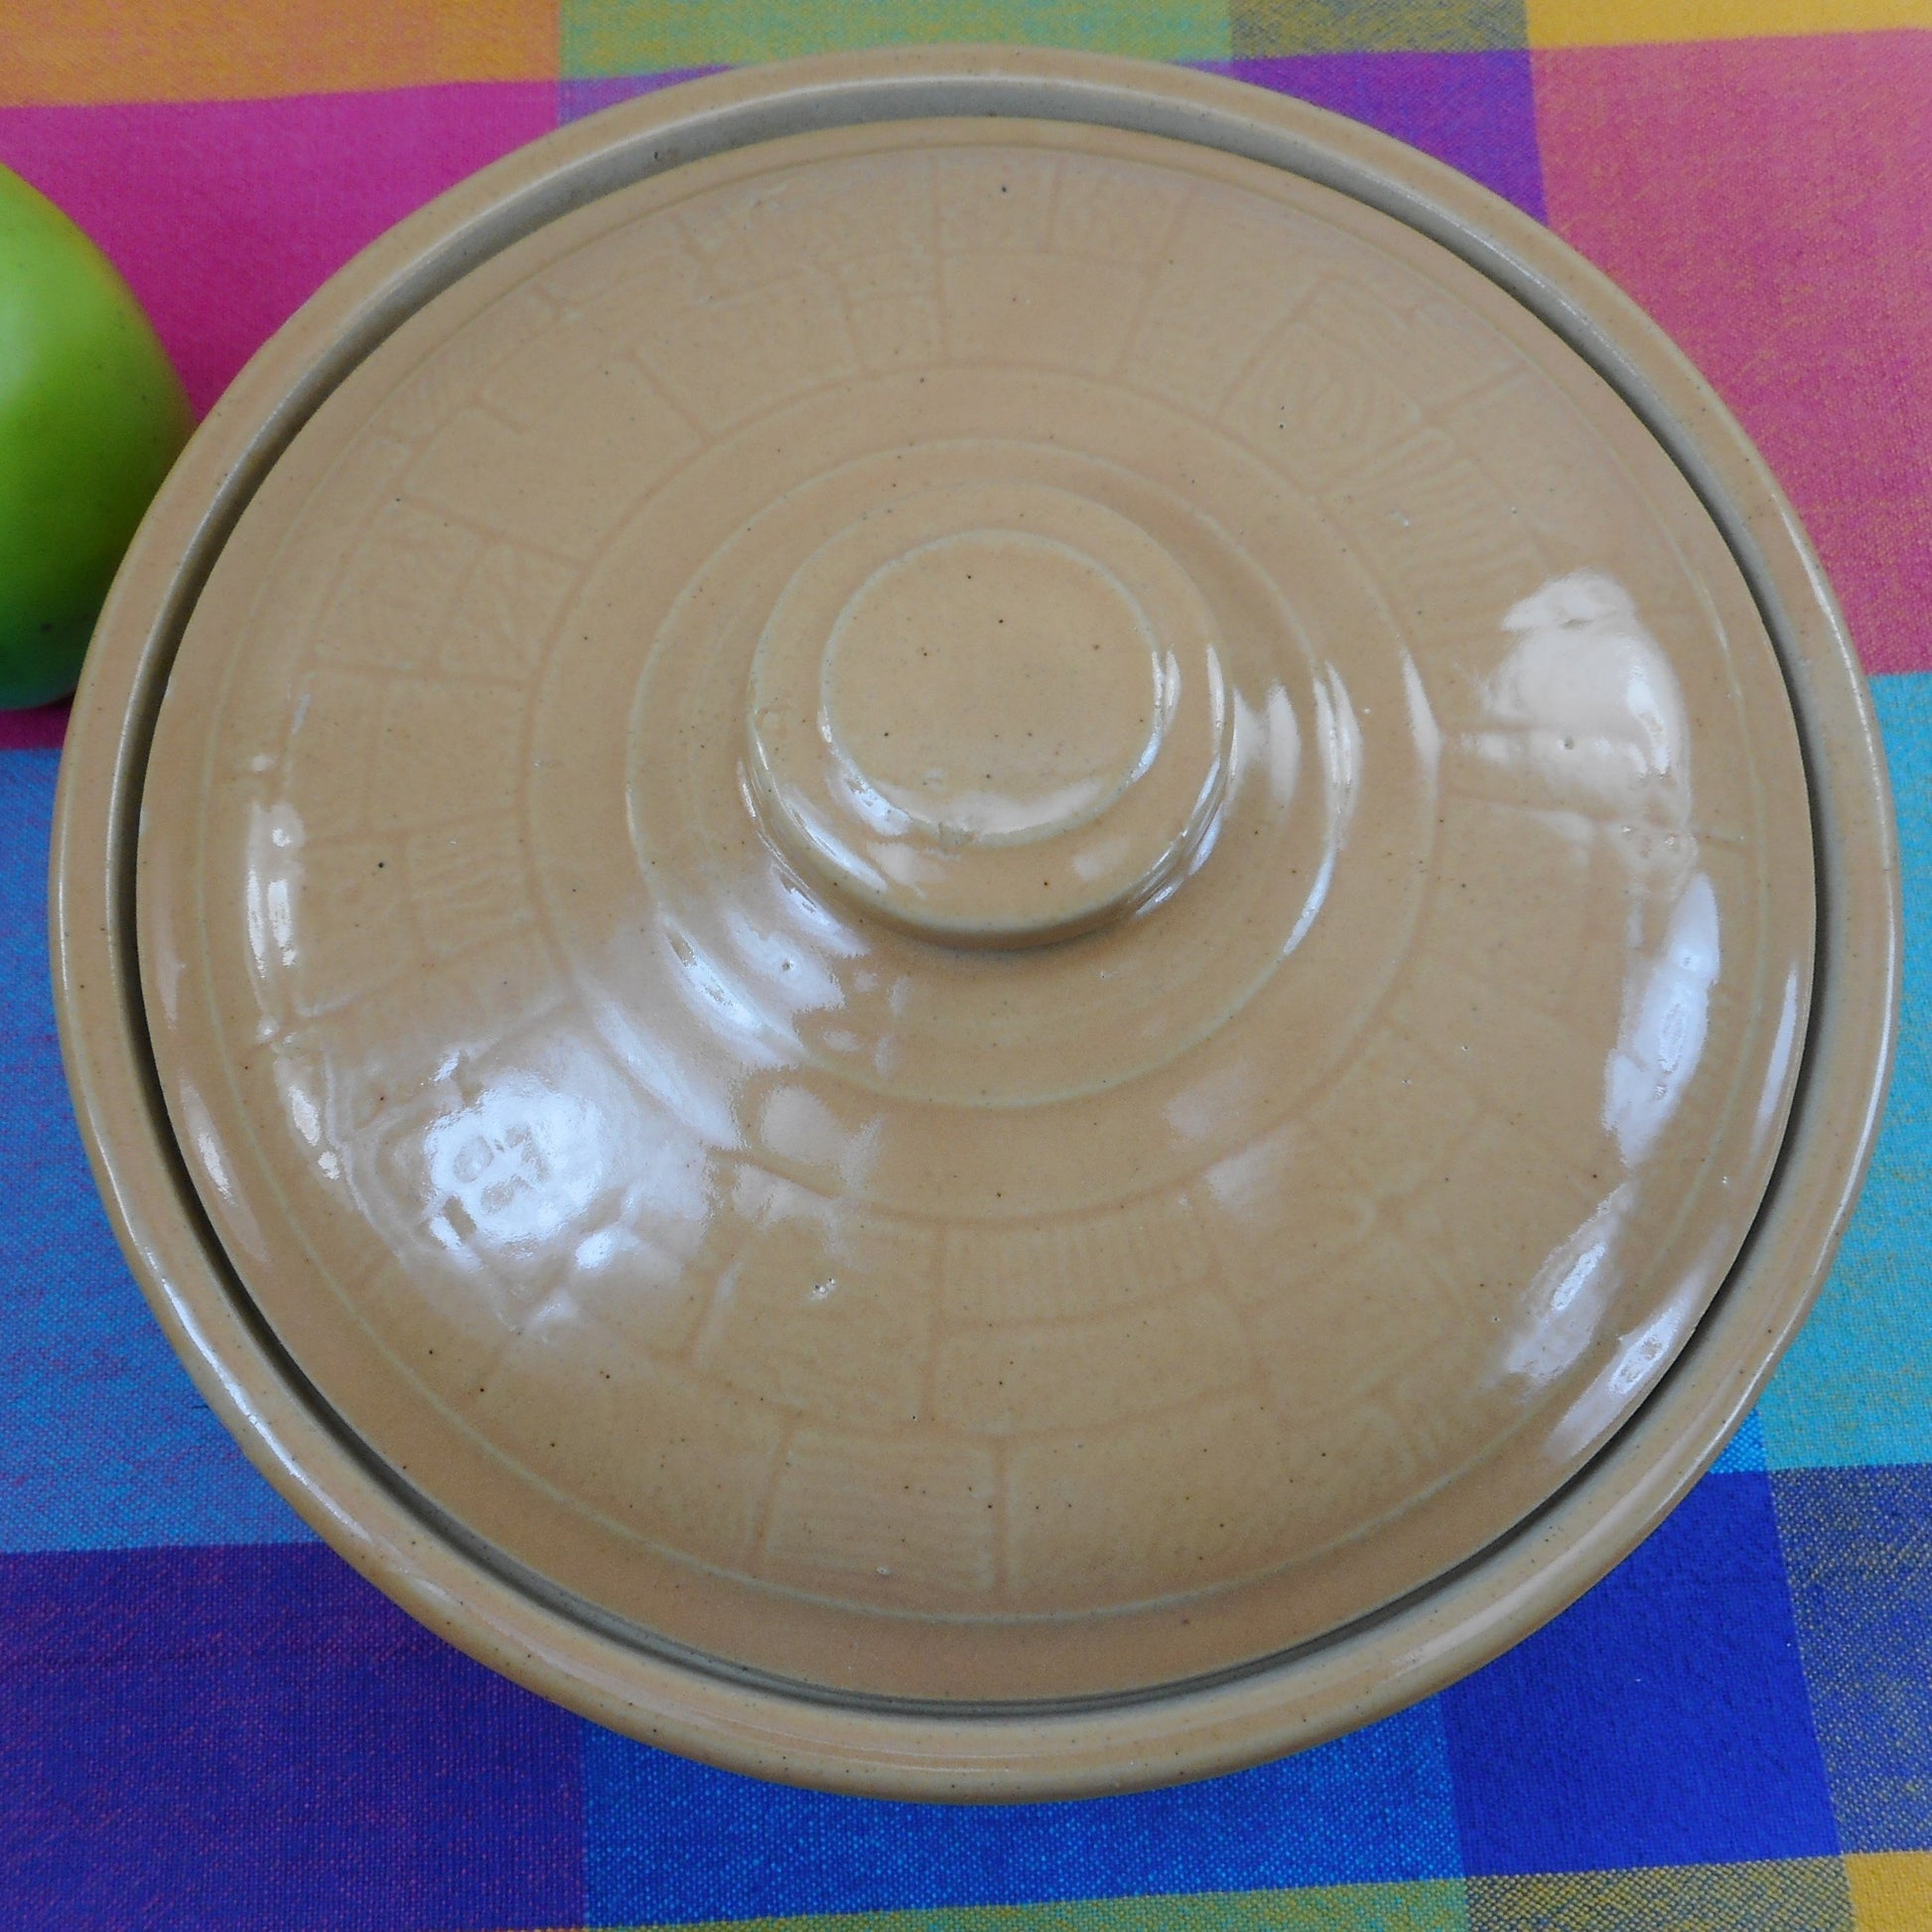 USA Round 8" Yellow Ware Stoneware Covered Casserole Lidded - Tile Wood Parquet Pattern